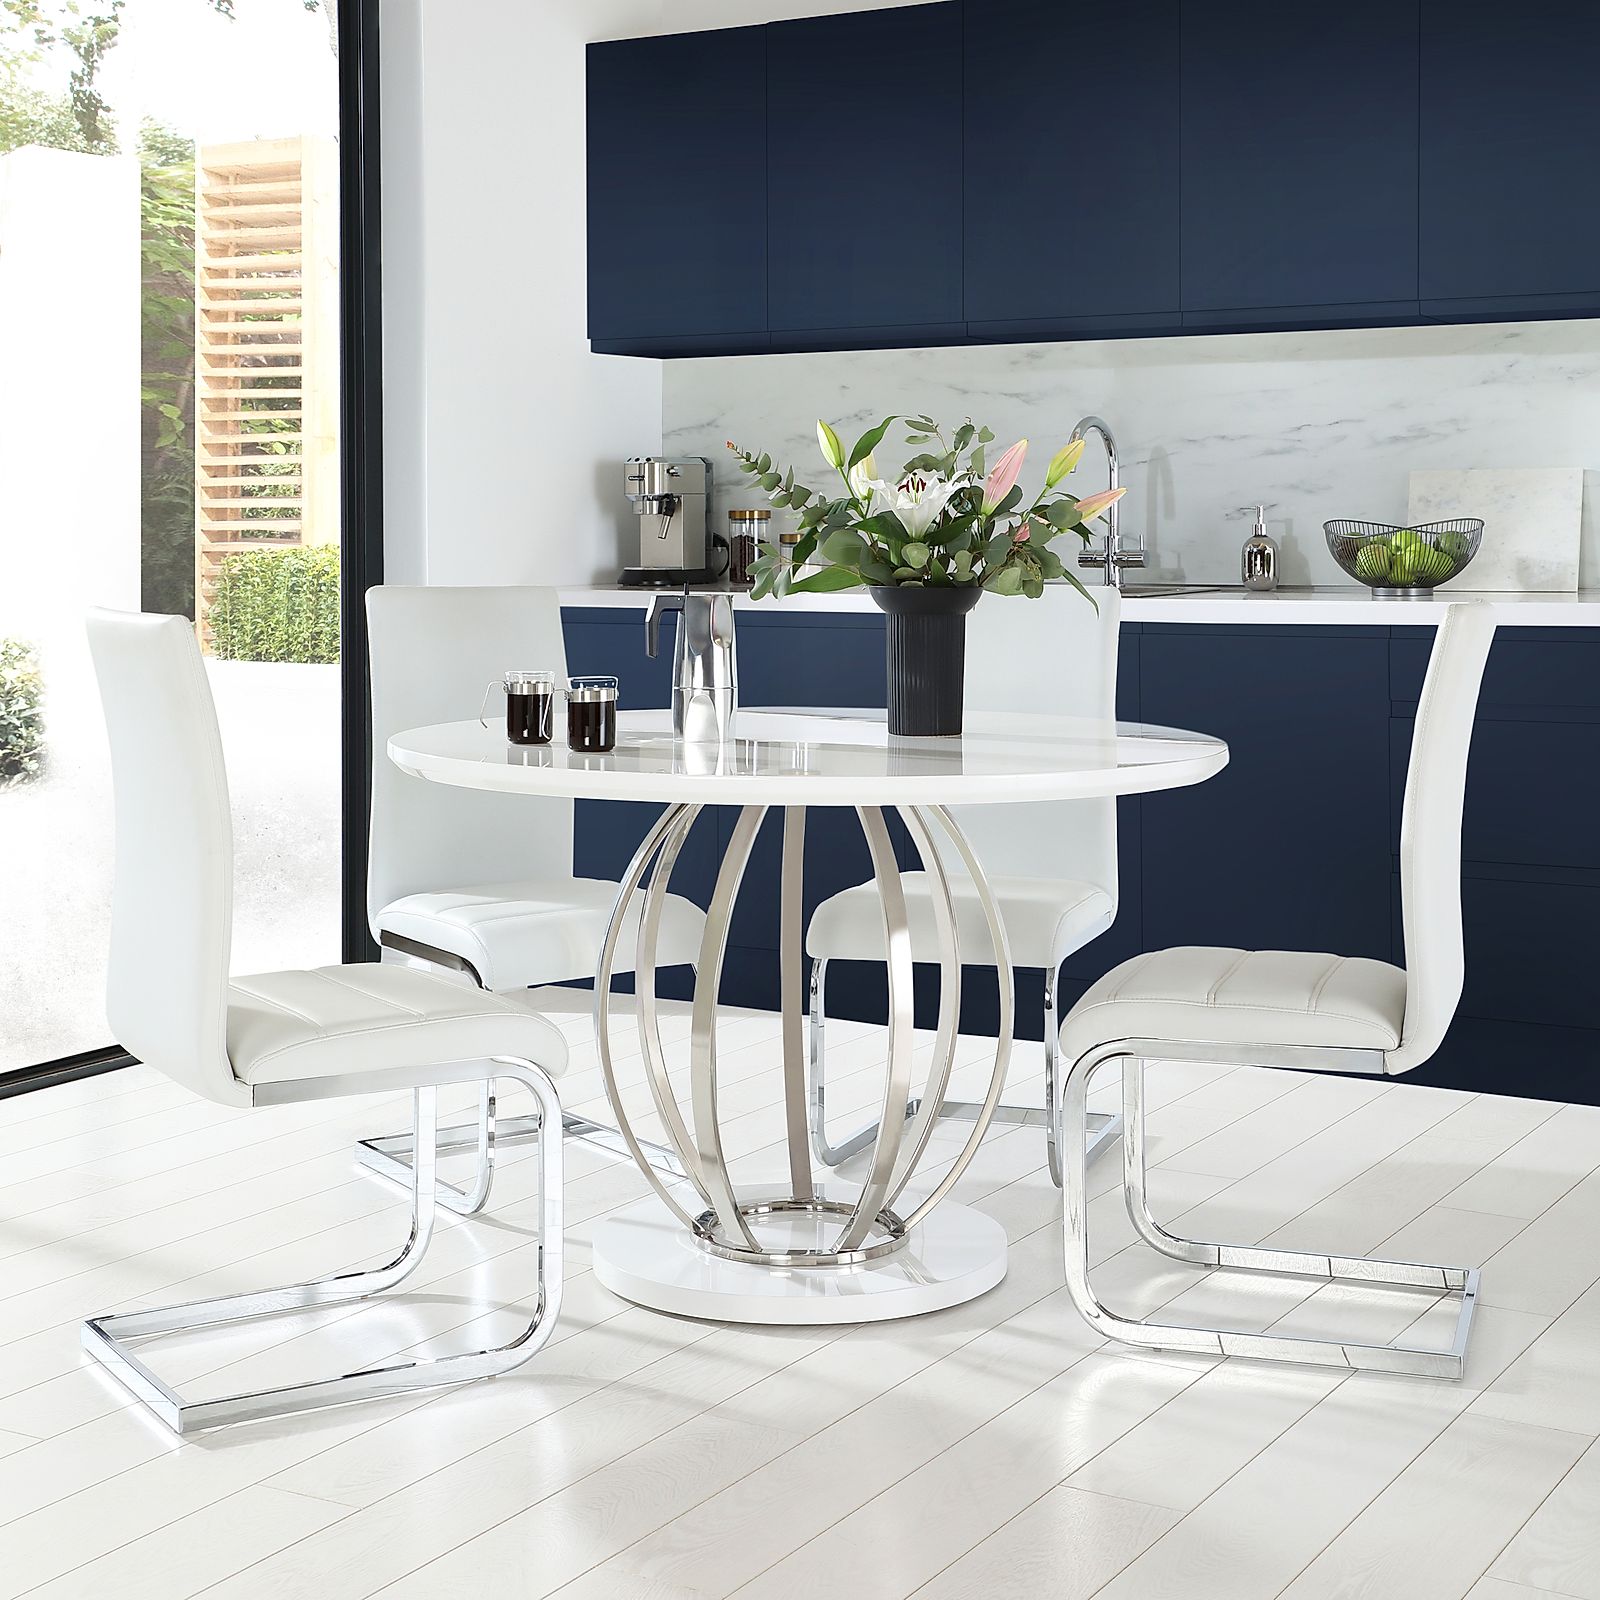 white high gloss dining table and chairs Full white high gloss dining table and 4 chairs